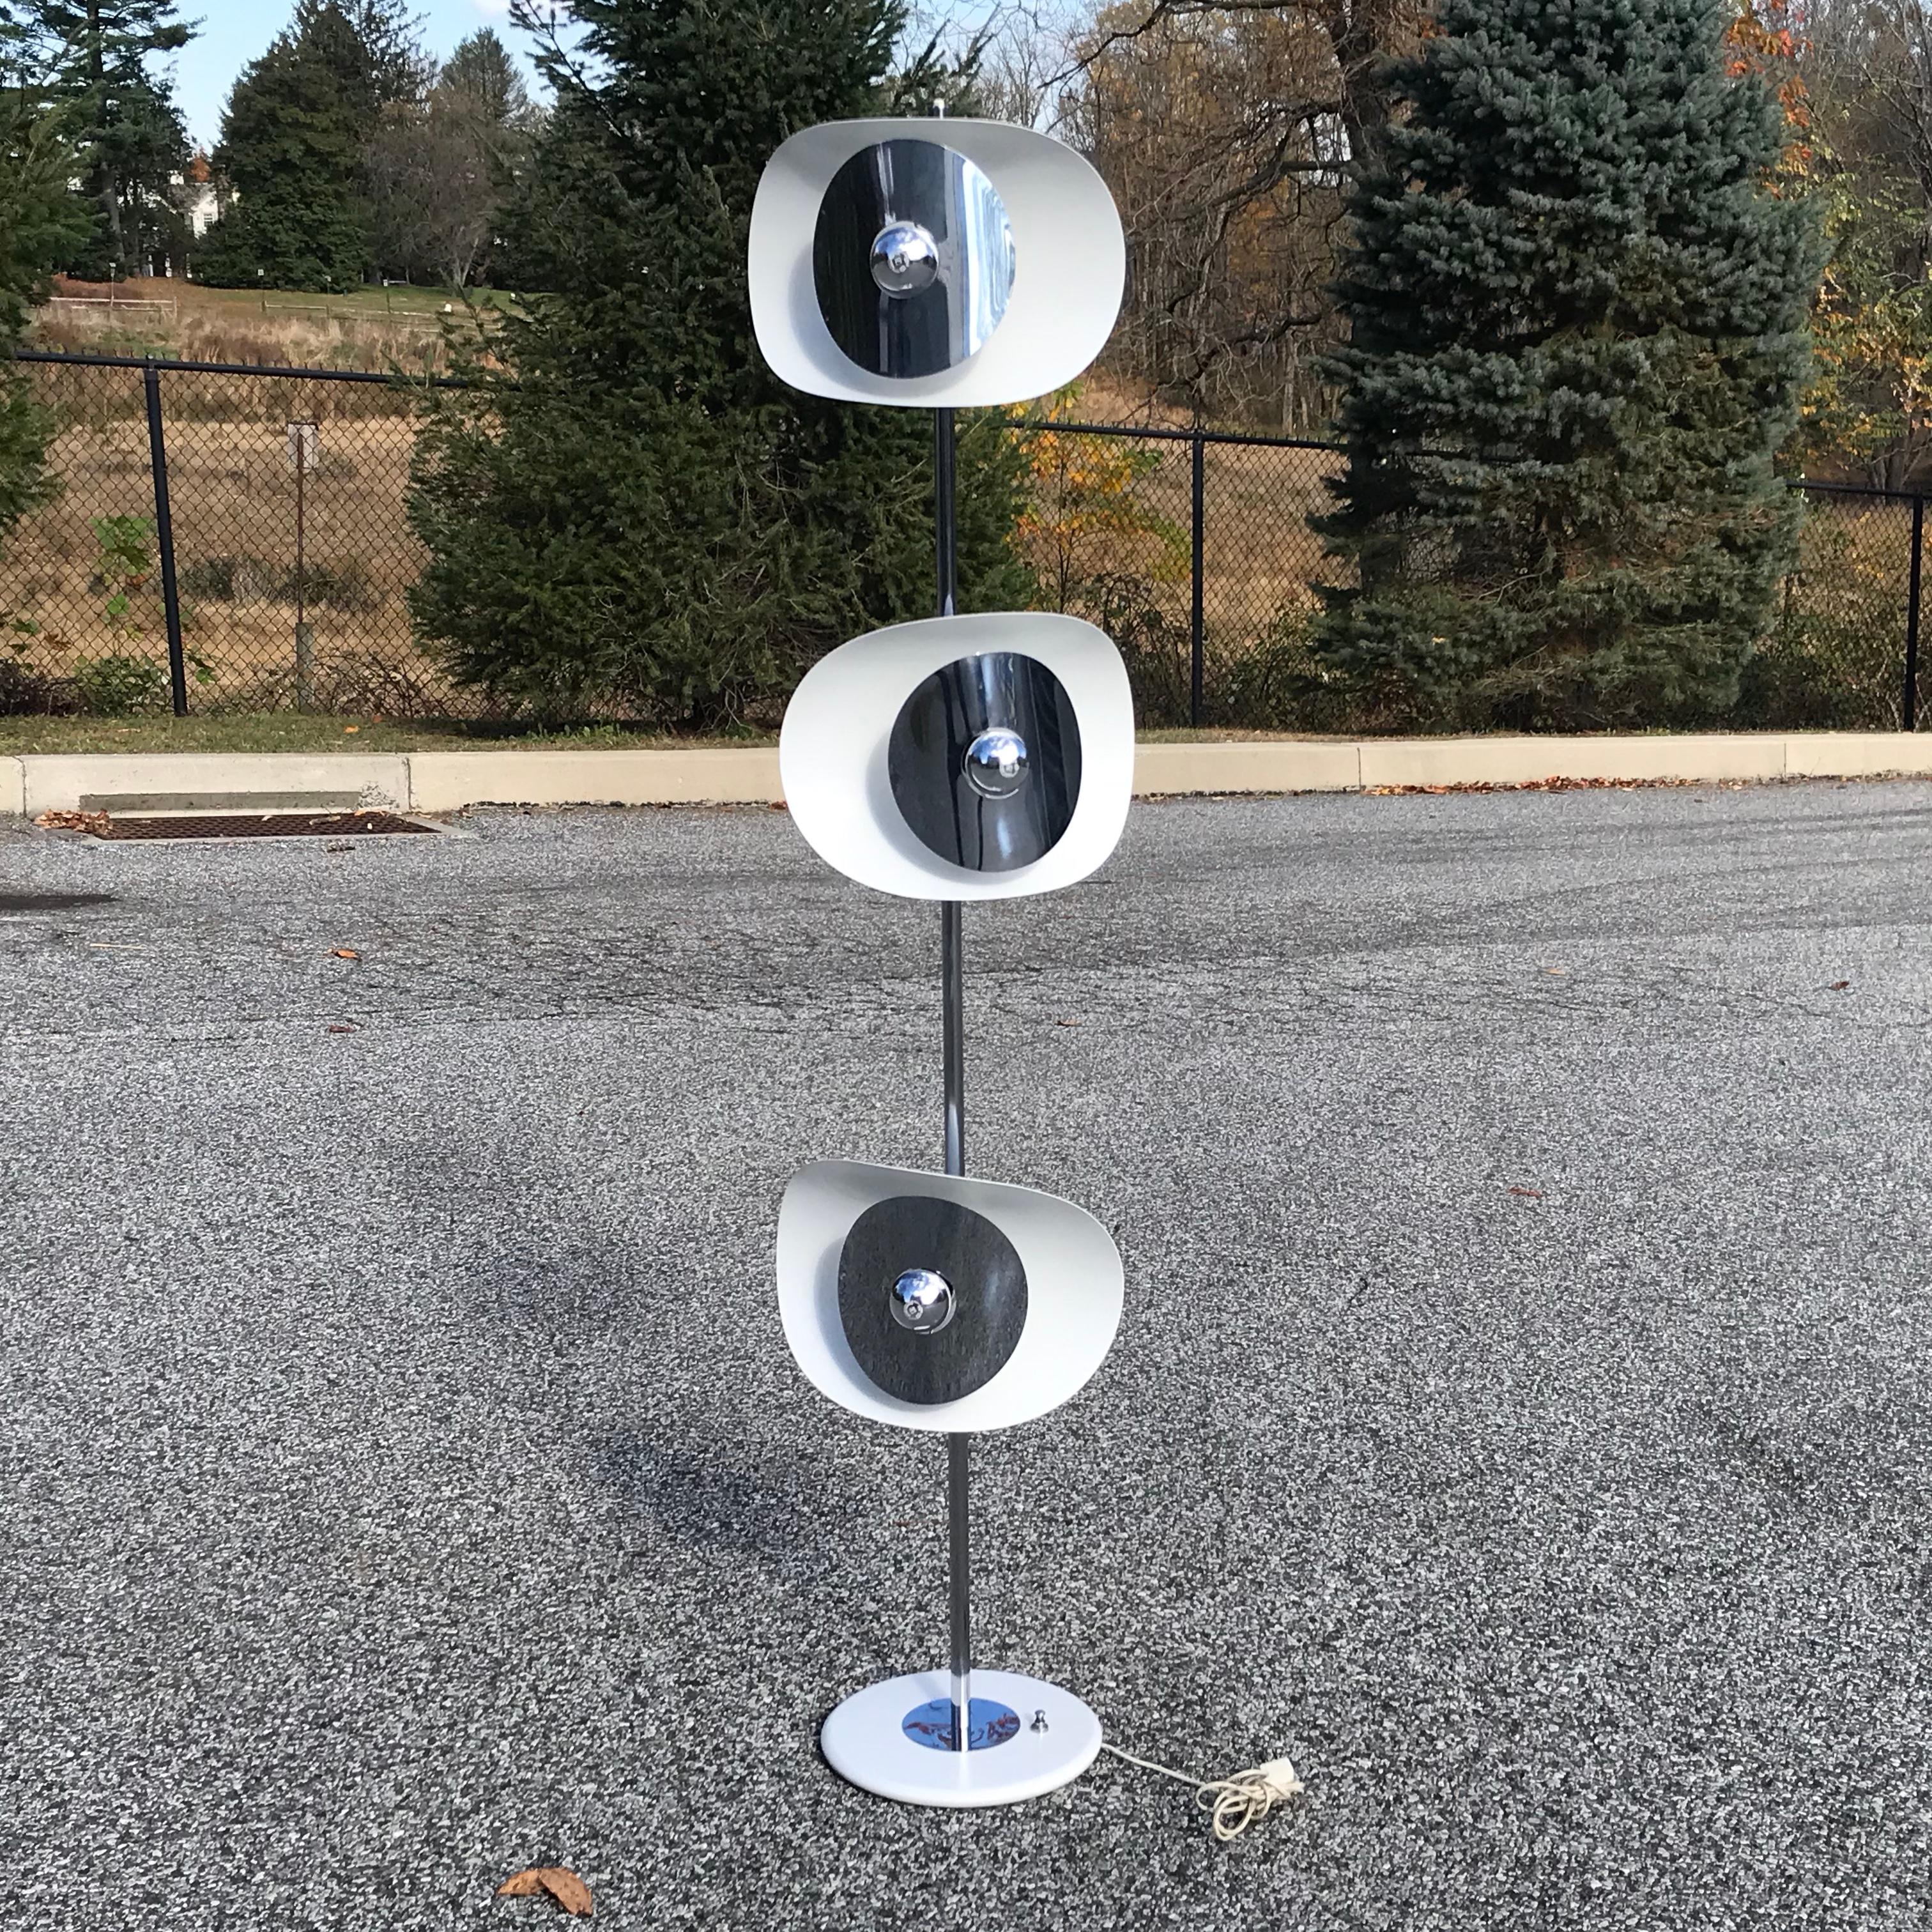 Modern design sculptural enameled metal and polished chrome floor lamp with three adjustable fixtures. Marked Brevettato Made in Italy. Three way footswitch lights one, two, or all three lamps. Uses standard lamp bulb size shown with decorative